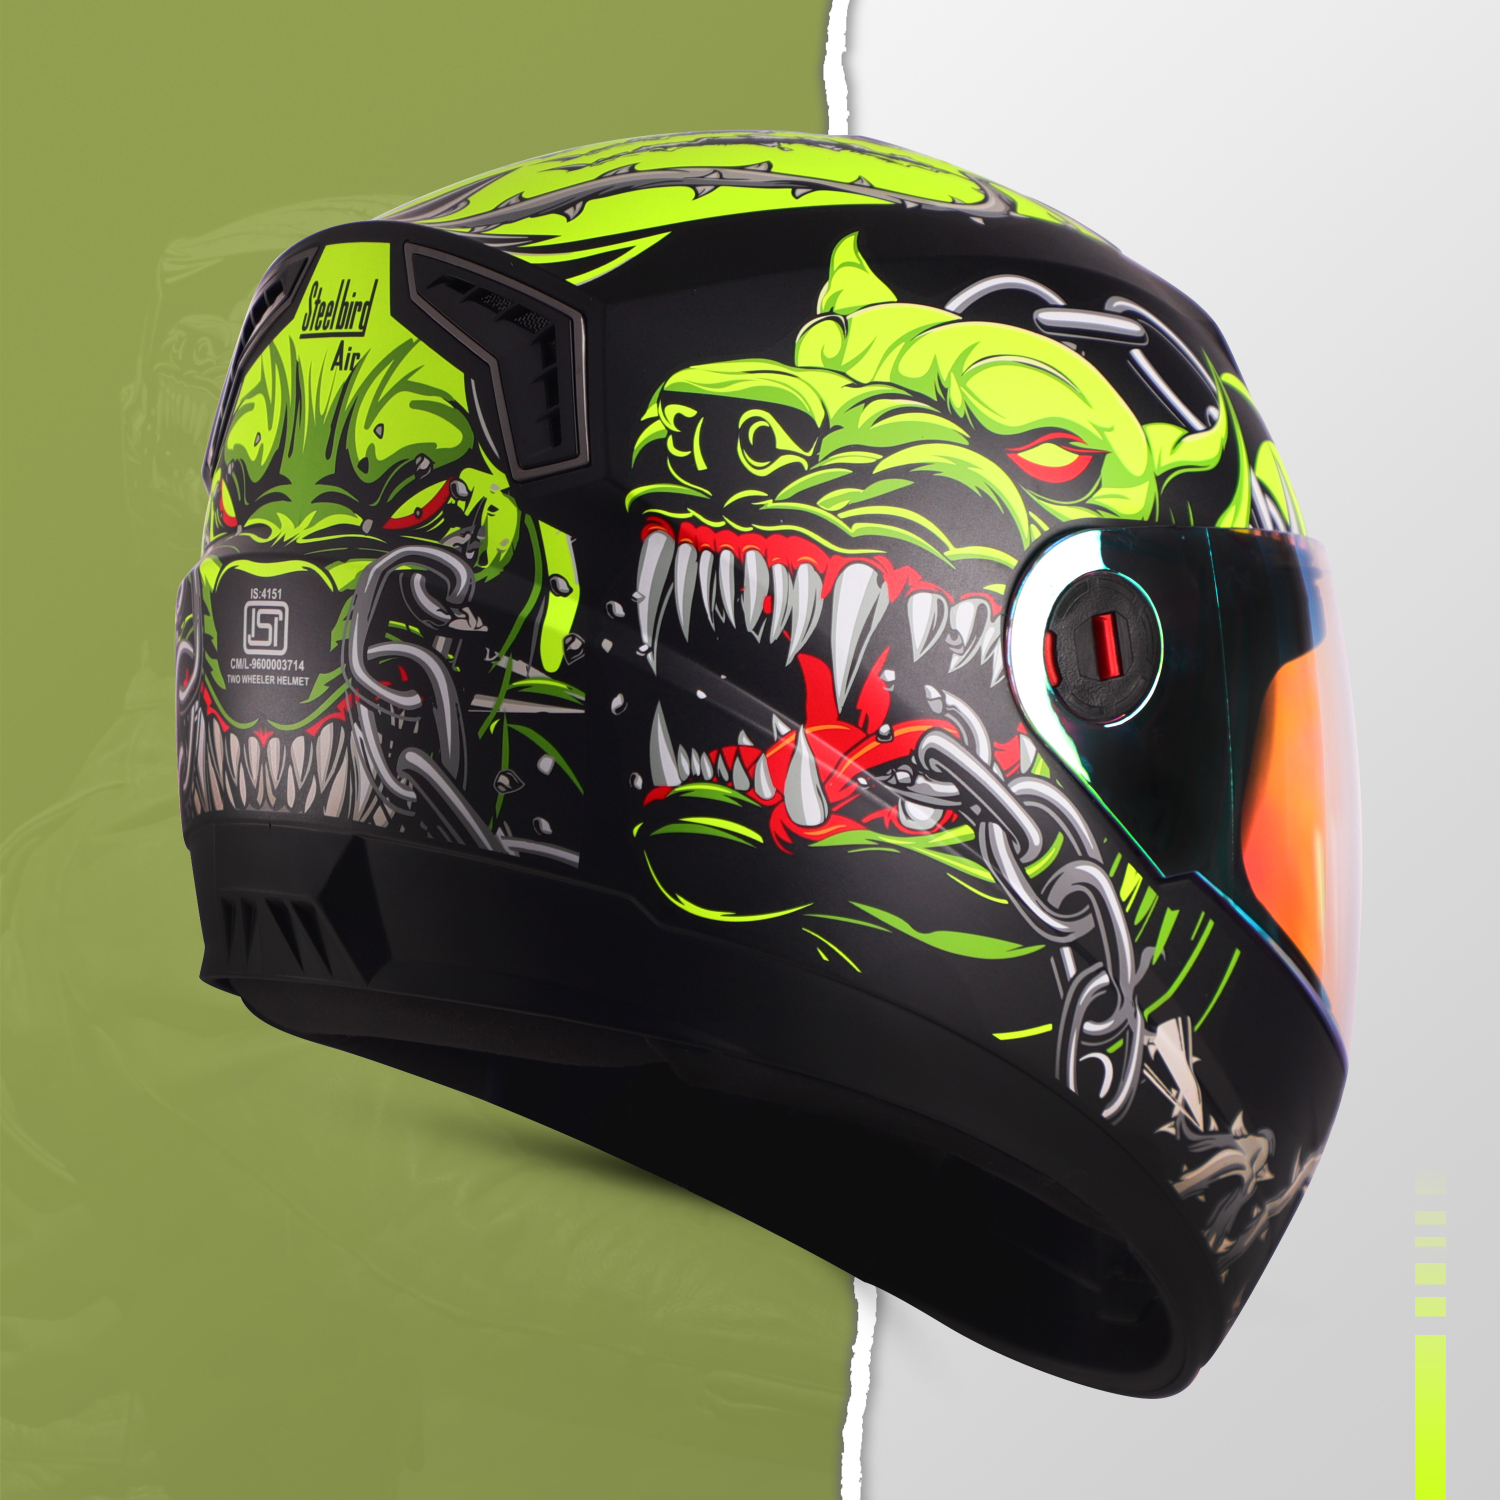 Steelbird SBA-1 Angry Dog ISI Certified Full Face Graphic Helmet For Men And Women With Inner Smoke Sun Shield (Matt Black Neon With Night Vision Gold Visor)